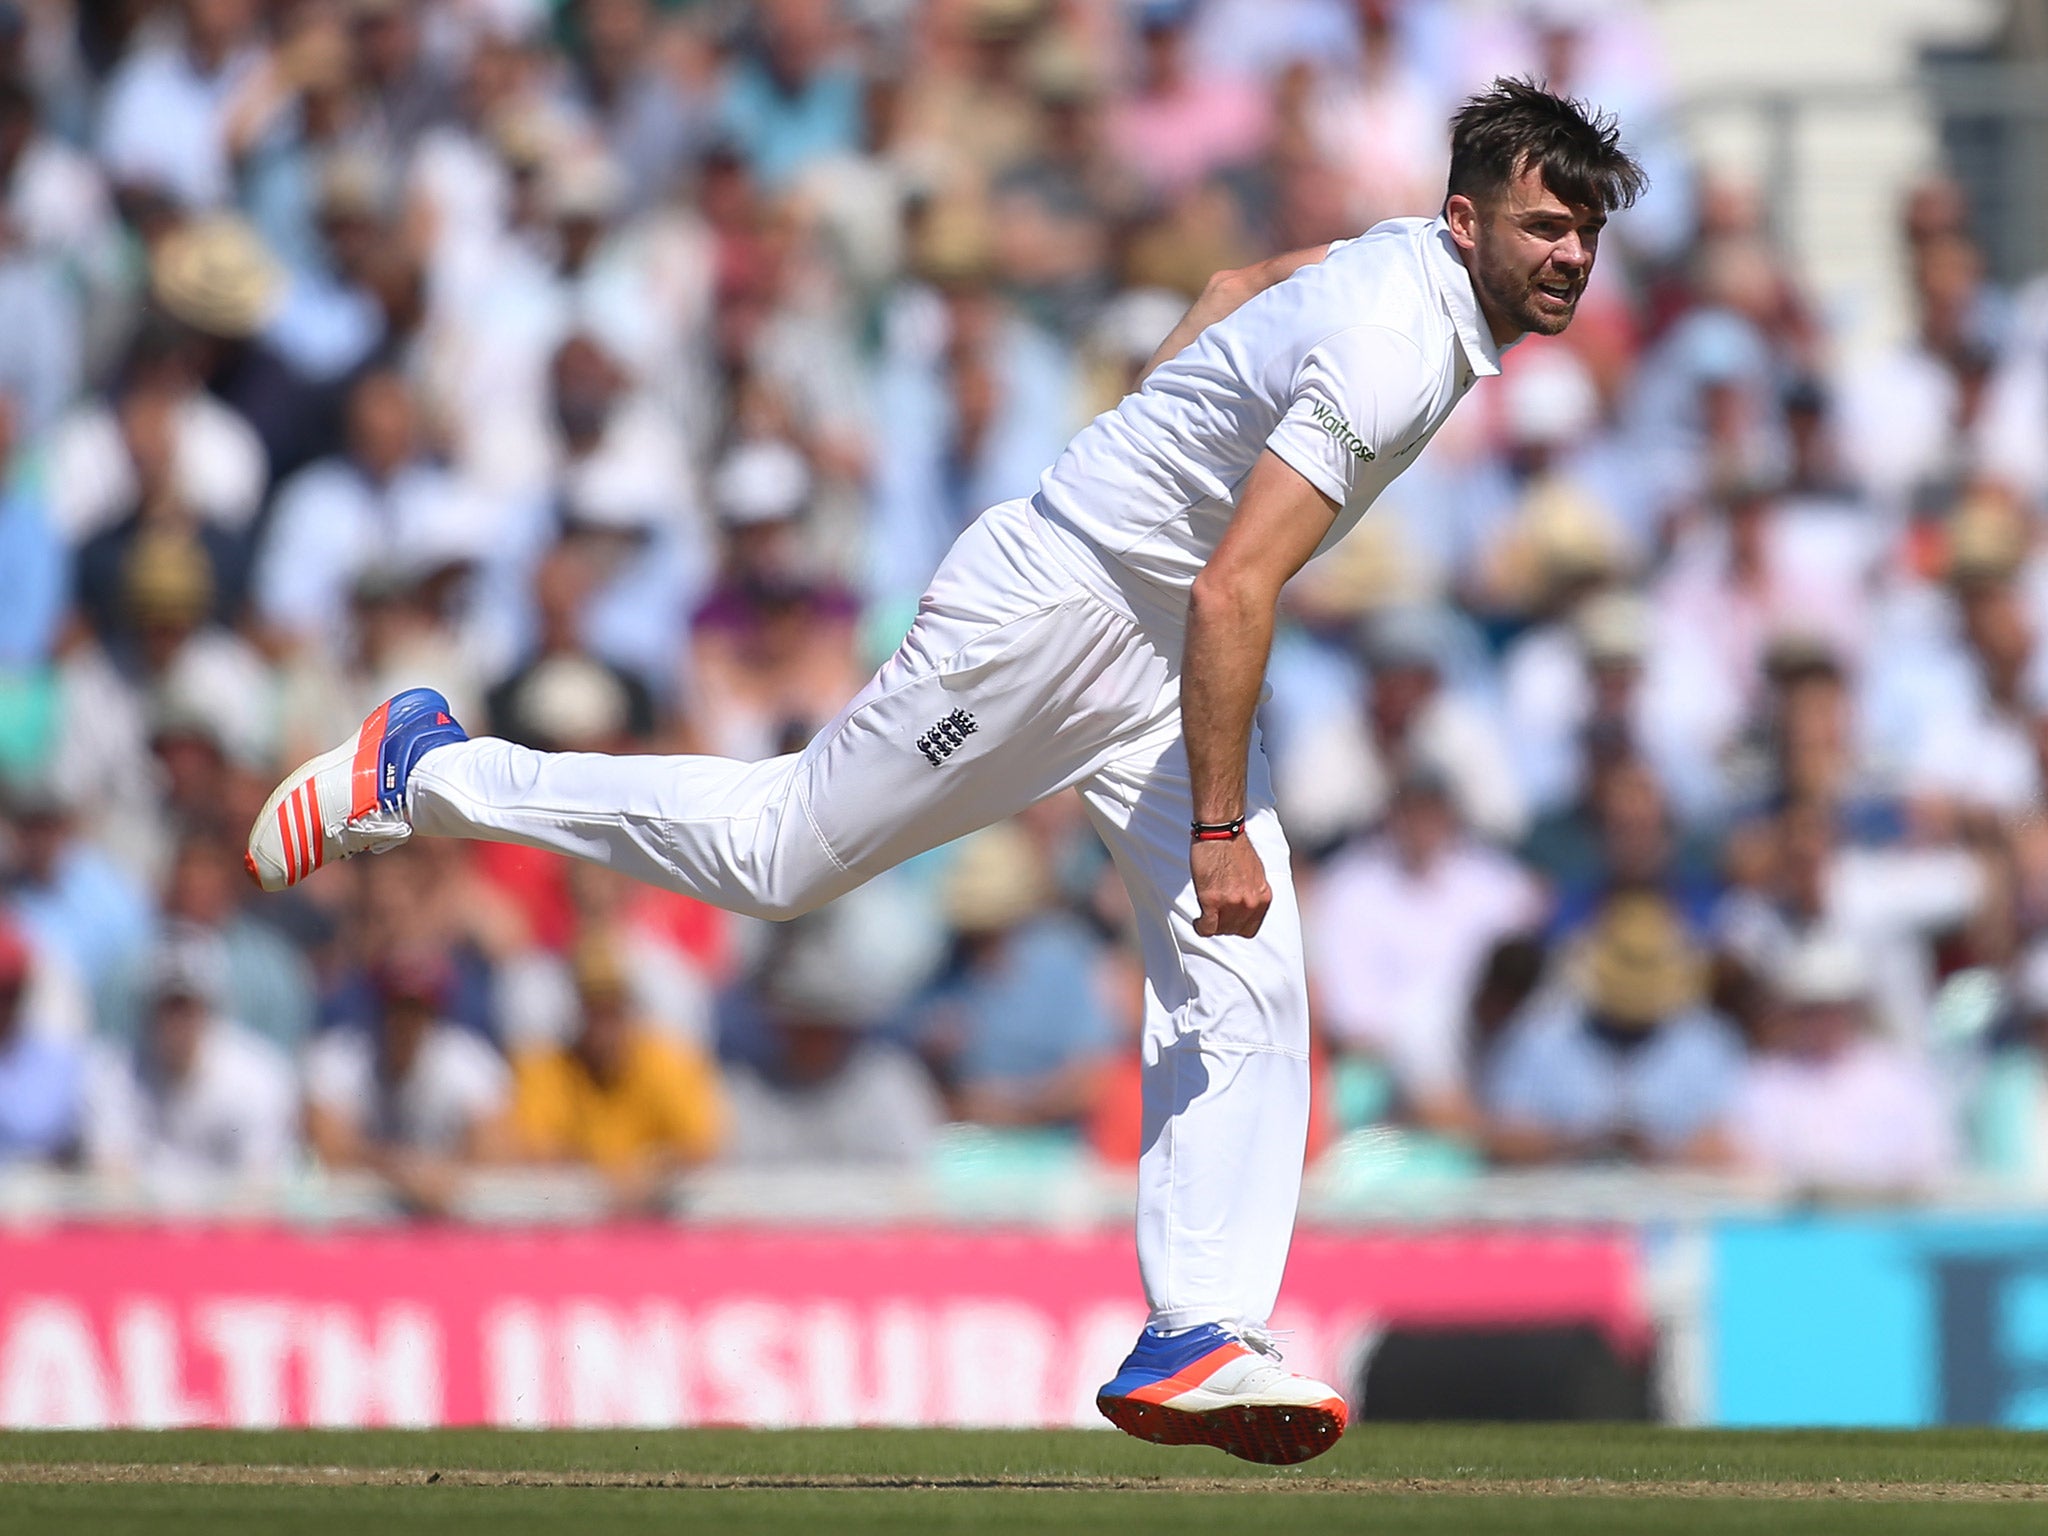 James Anderson has been ruled out of England's tour of Bangladesh